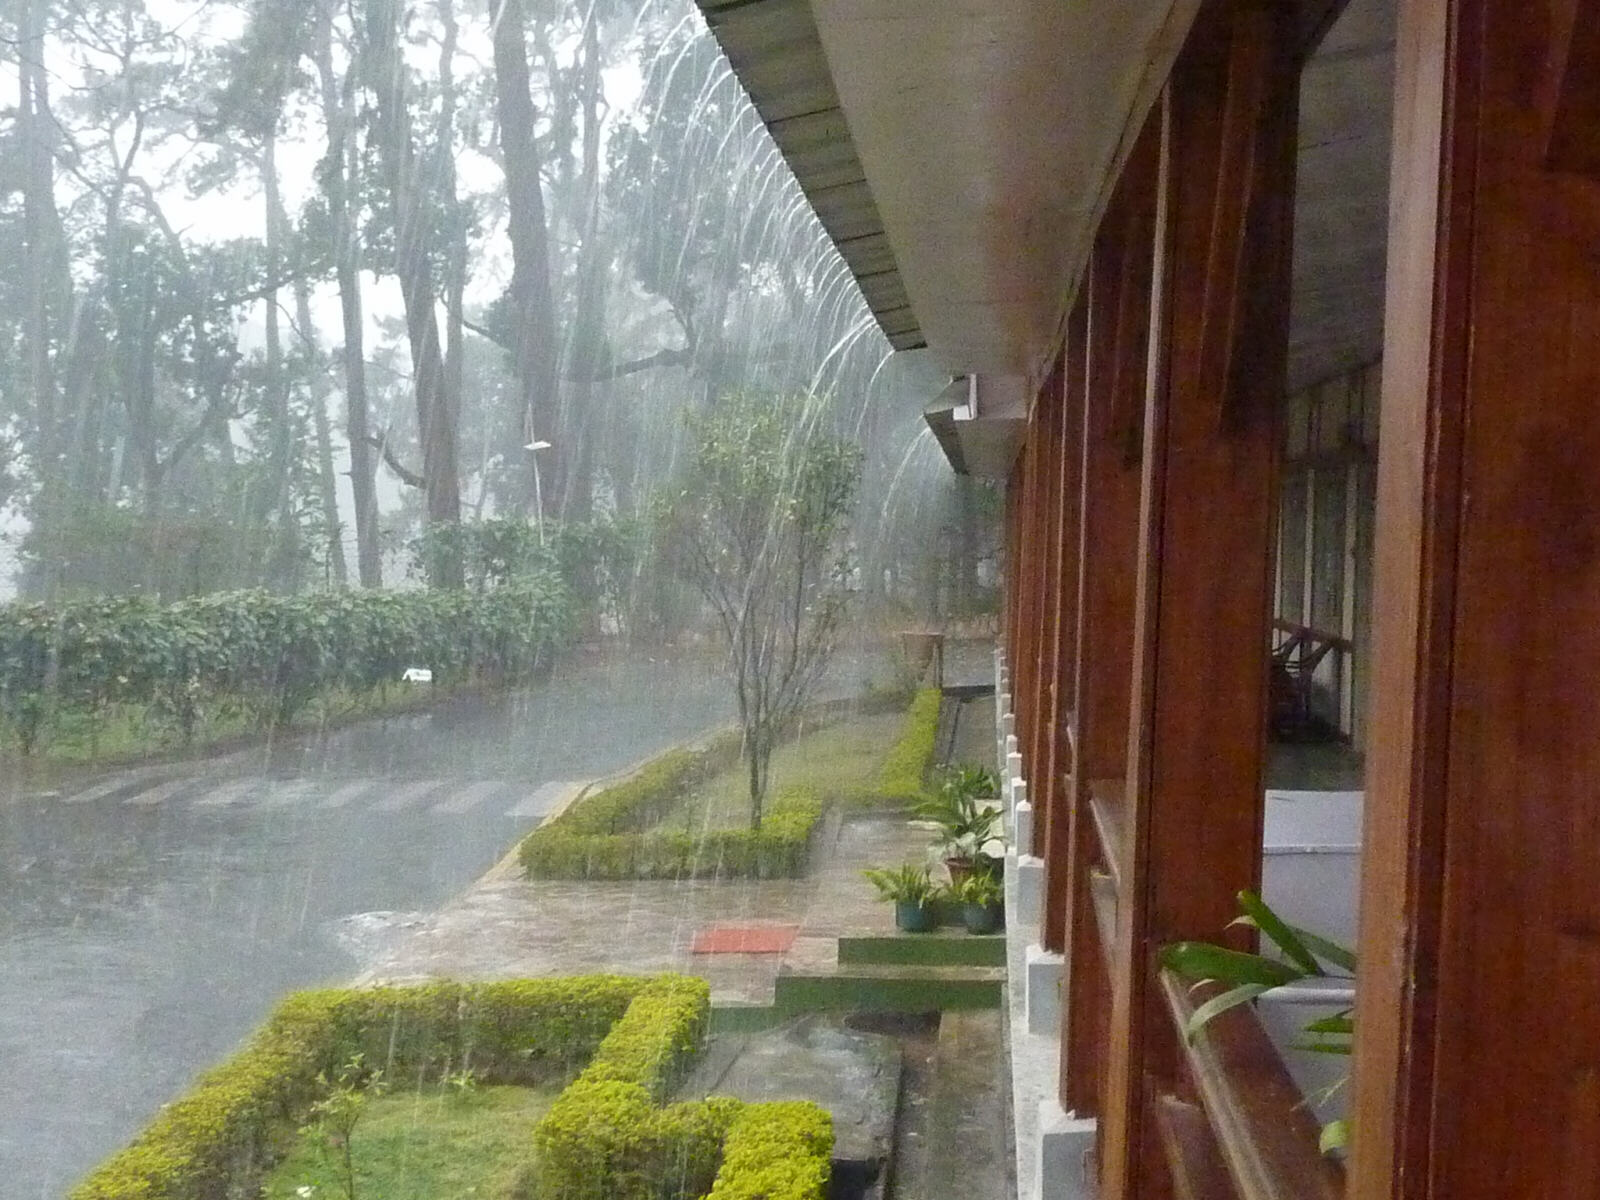 The wettest place on earth - rainstorm at the Pinewood Hotel, Shillong, Meghalaya